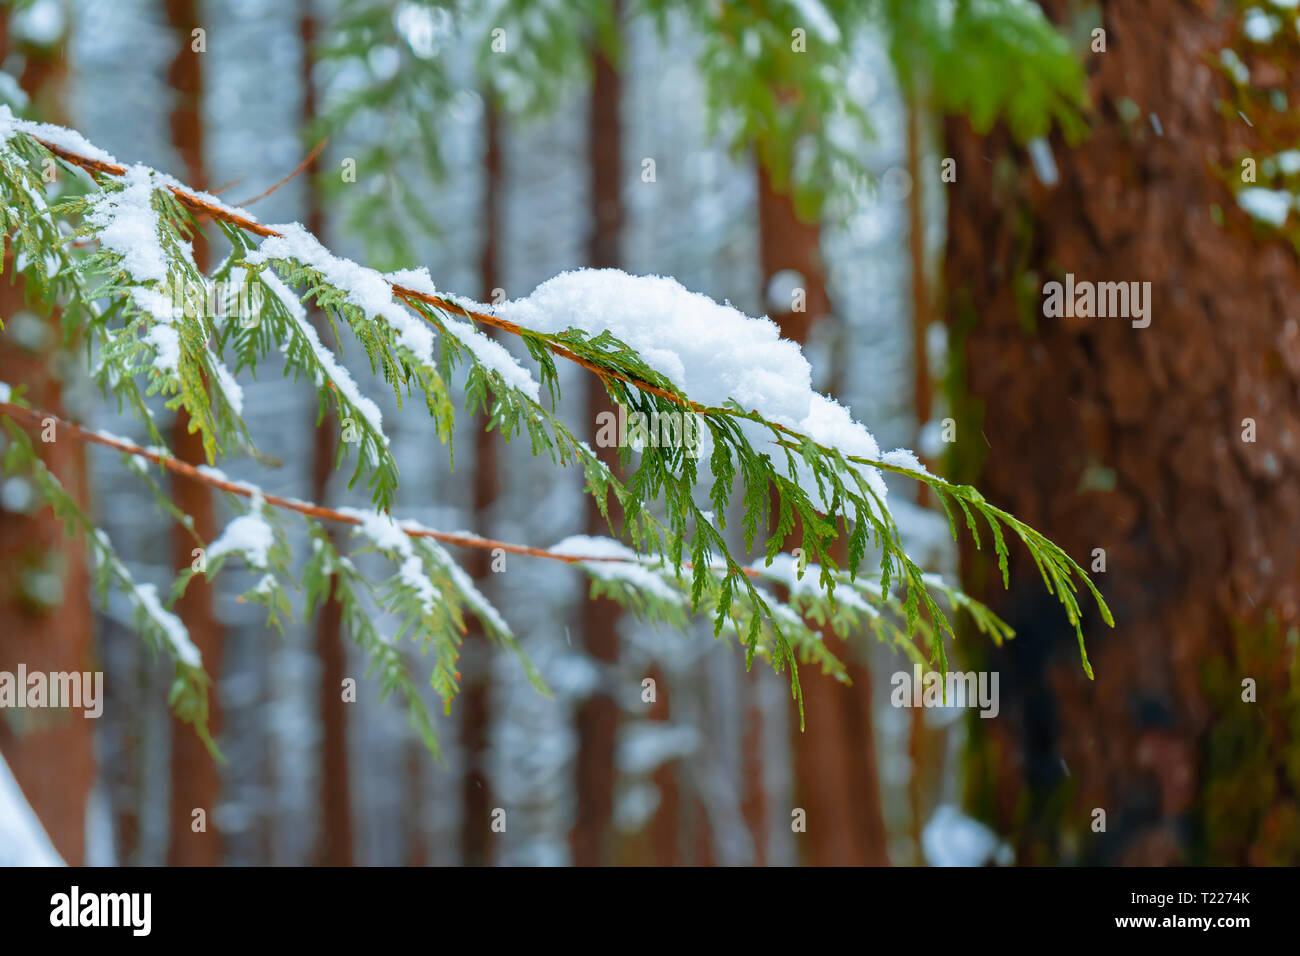 Evergreen tree branch in foreground with fluffy snow in a snowy forest with trees in background. Stock Photo